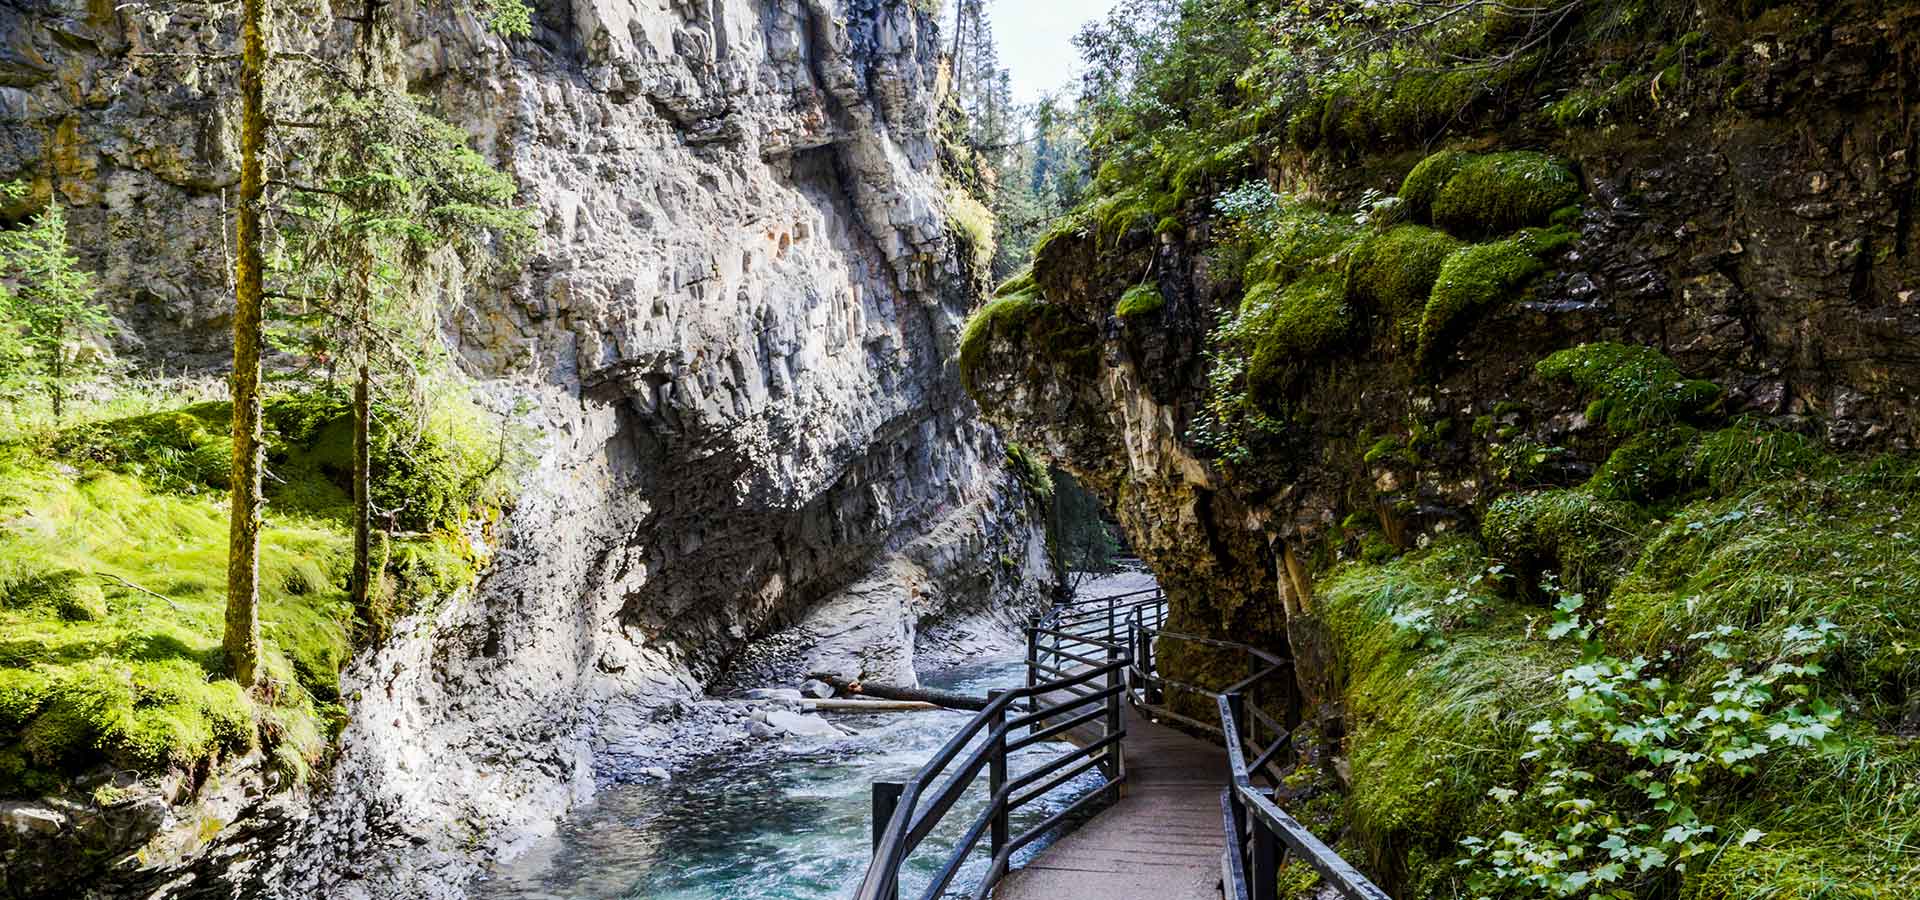 A suspended walkway snakes along the edges of Johnston's Canyon. The cliff faces are covered in moss.